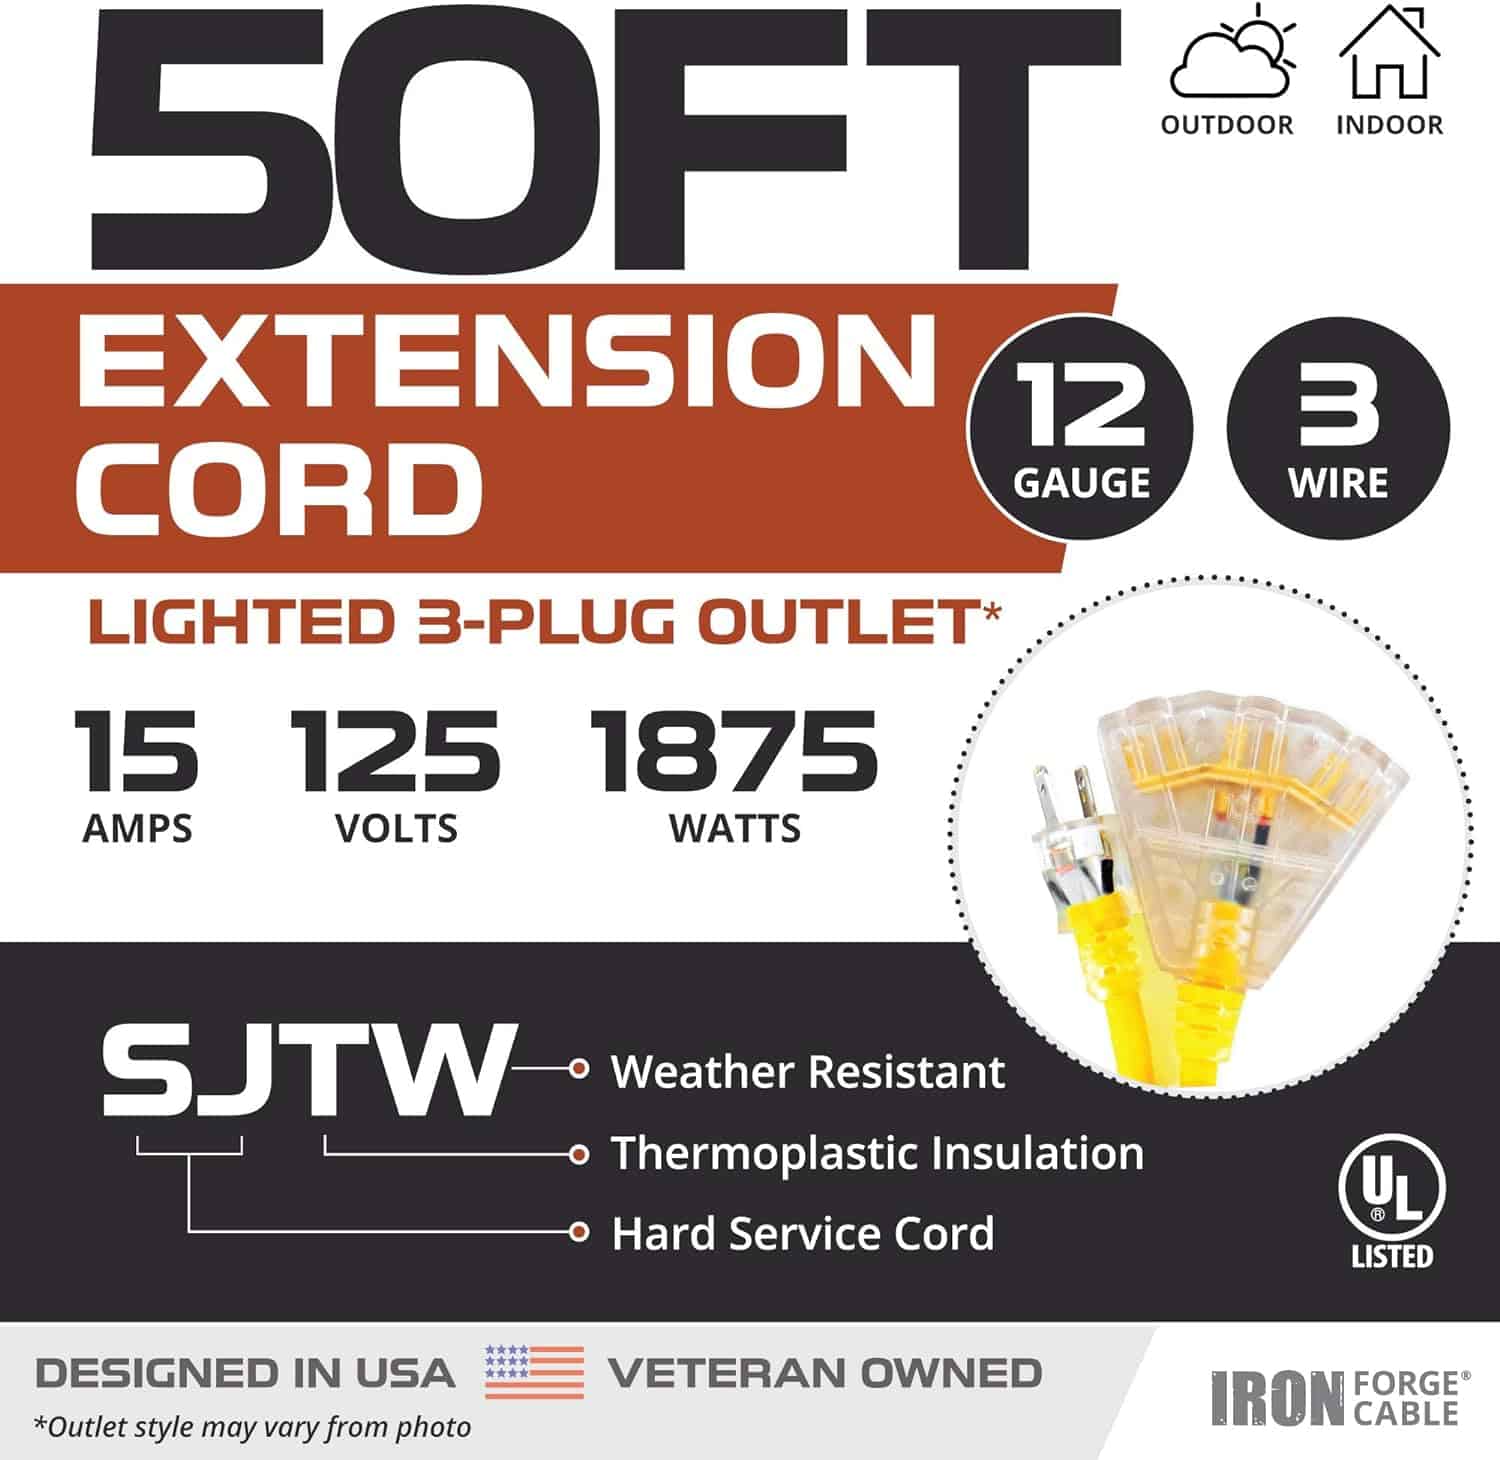 Iron-Forge-Cable-50-Foot-Lighted-Outdoor-Extension-Cord-with-3-Electrical-Power-Outlets-12-3-SJTW-Heavy-Duty-Yellow-Extension-Cable-with-3-Prong-Grounded-Plug-for-Safety-15-AMP